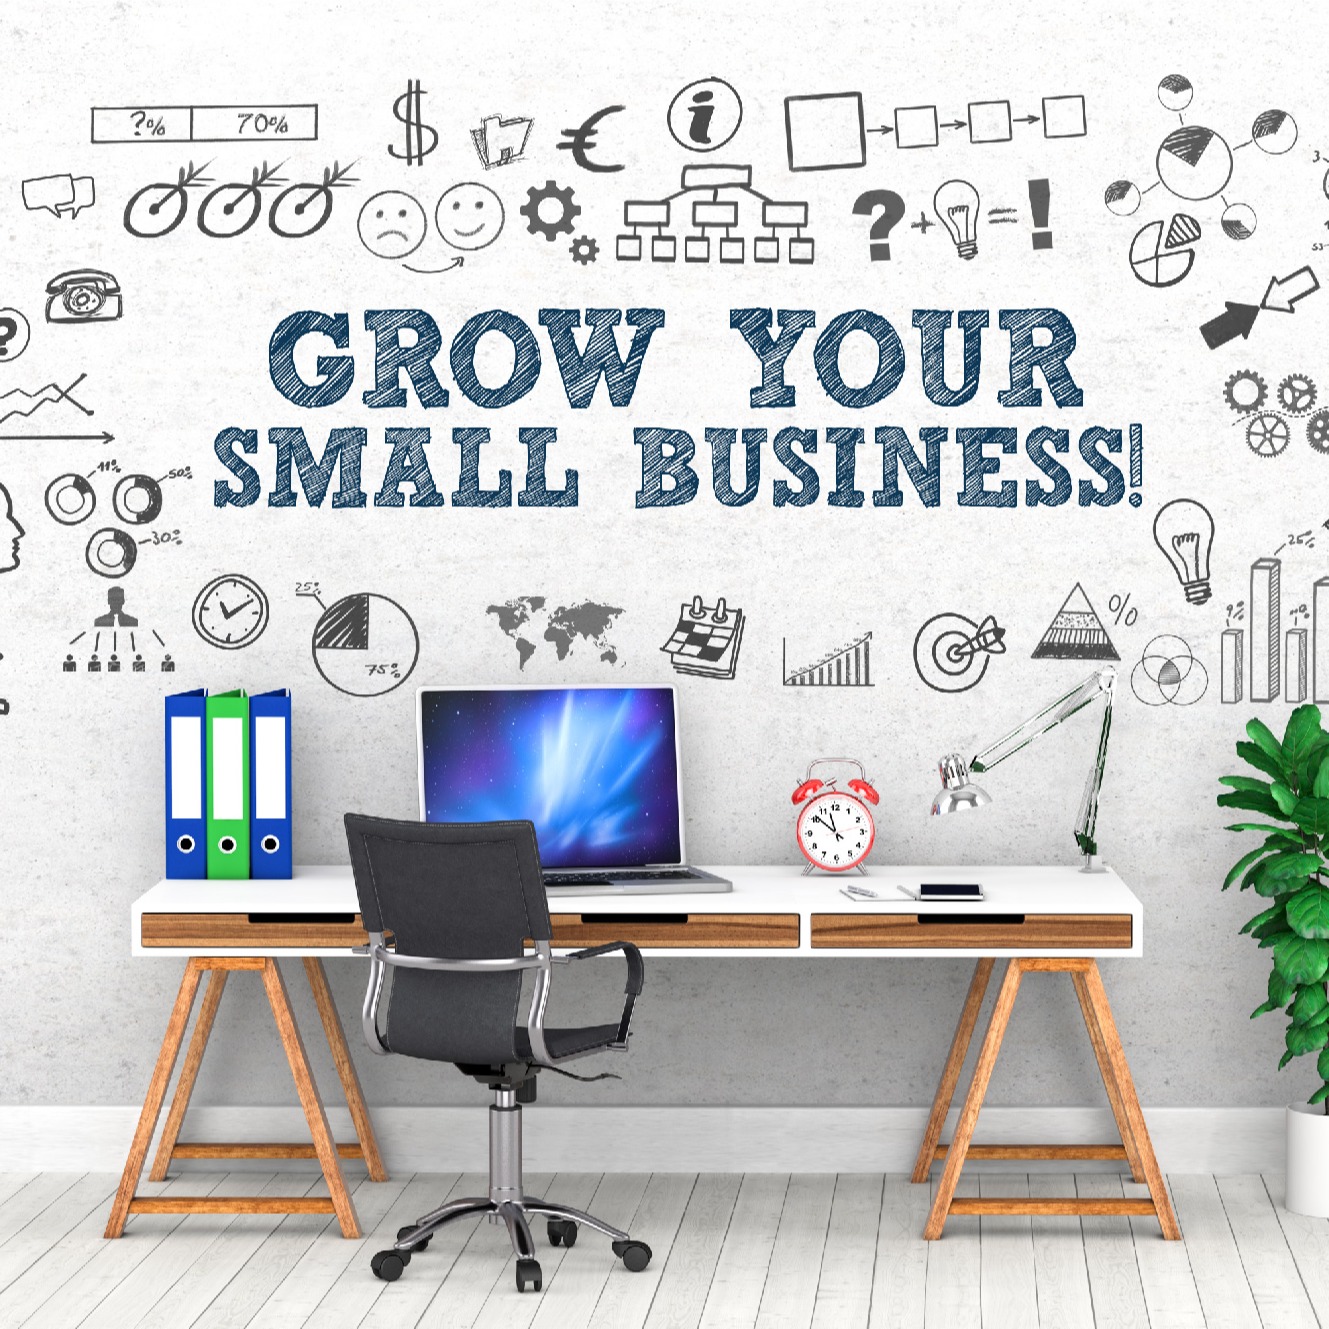 Small Business Resources